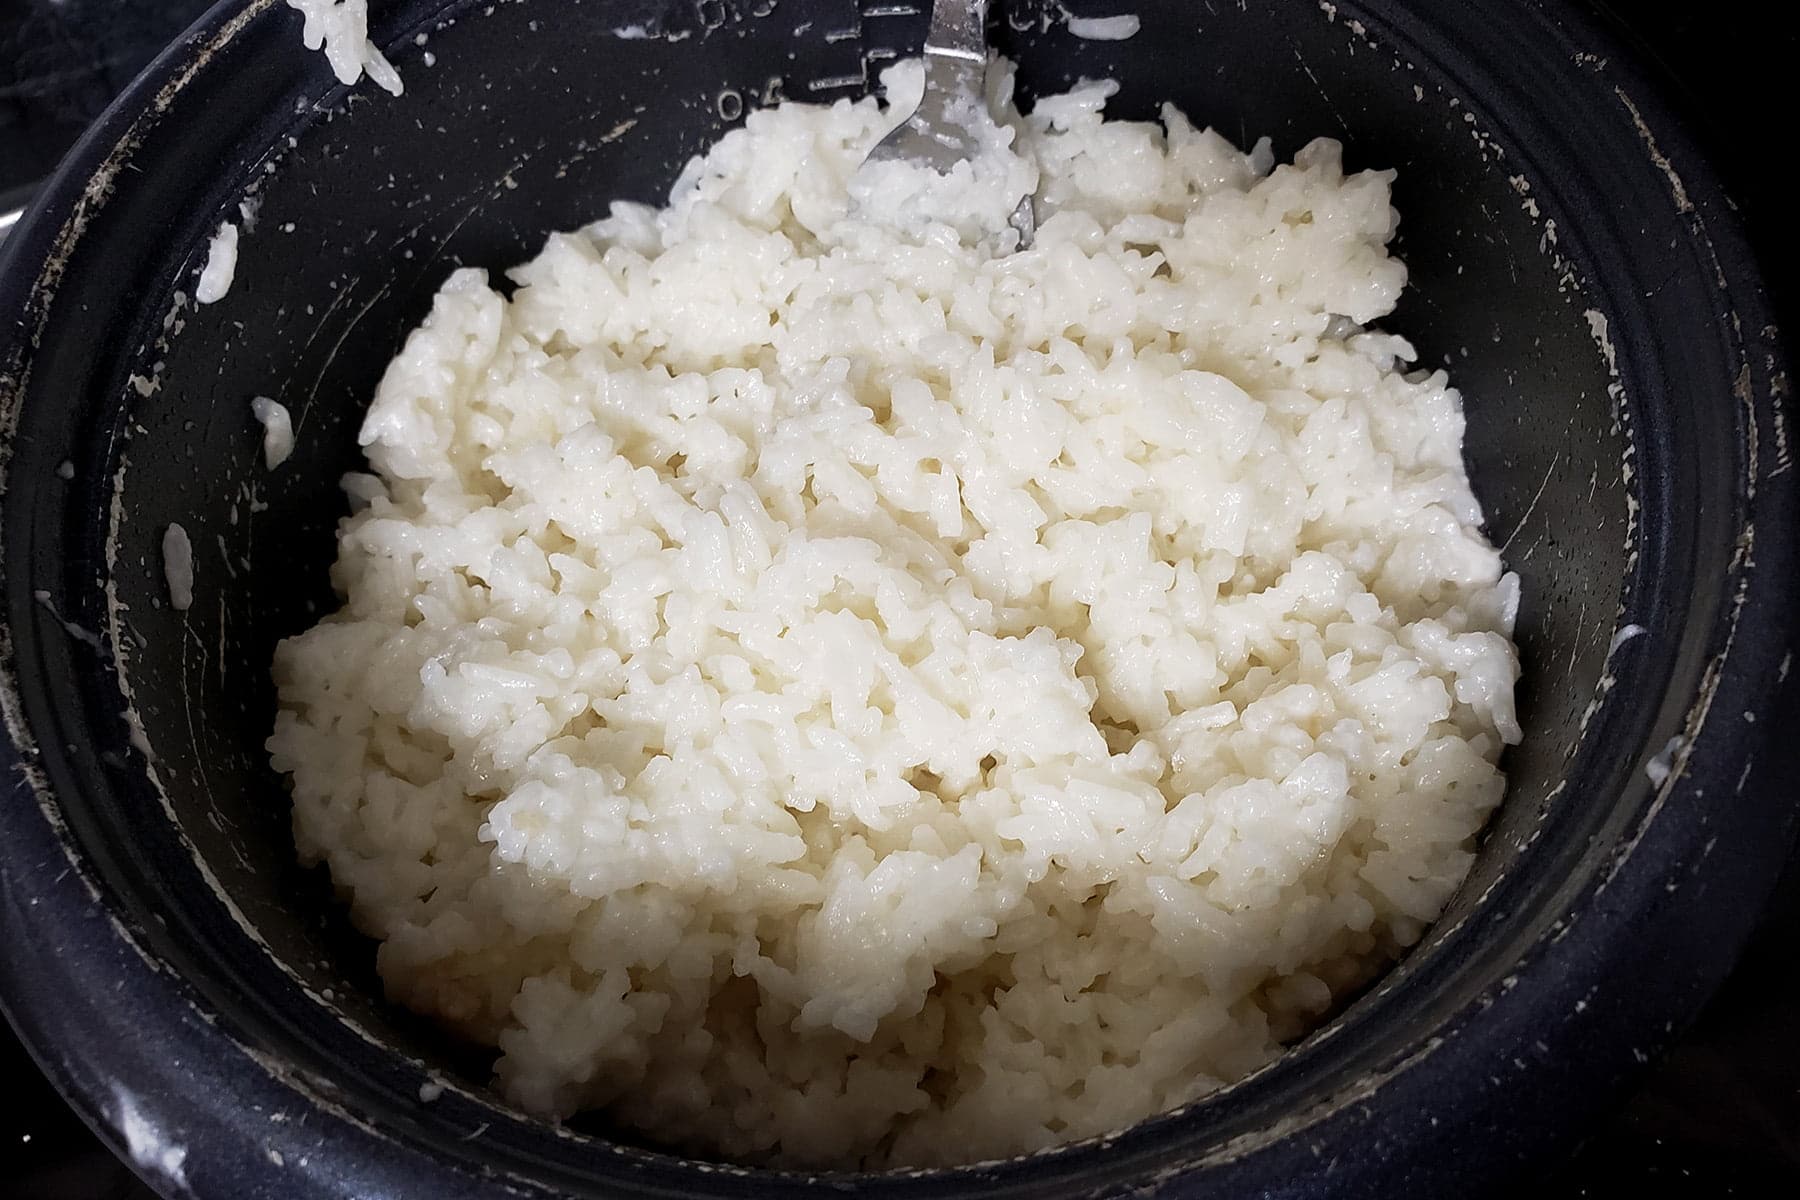 Fluffy white rice is shown inside a rice cooker.